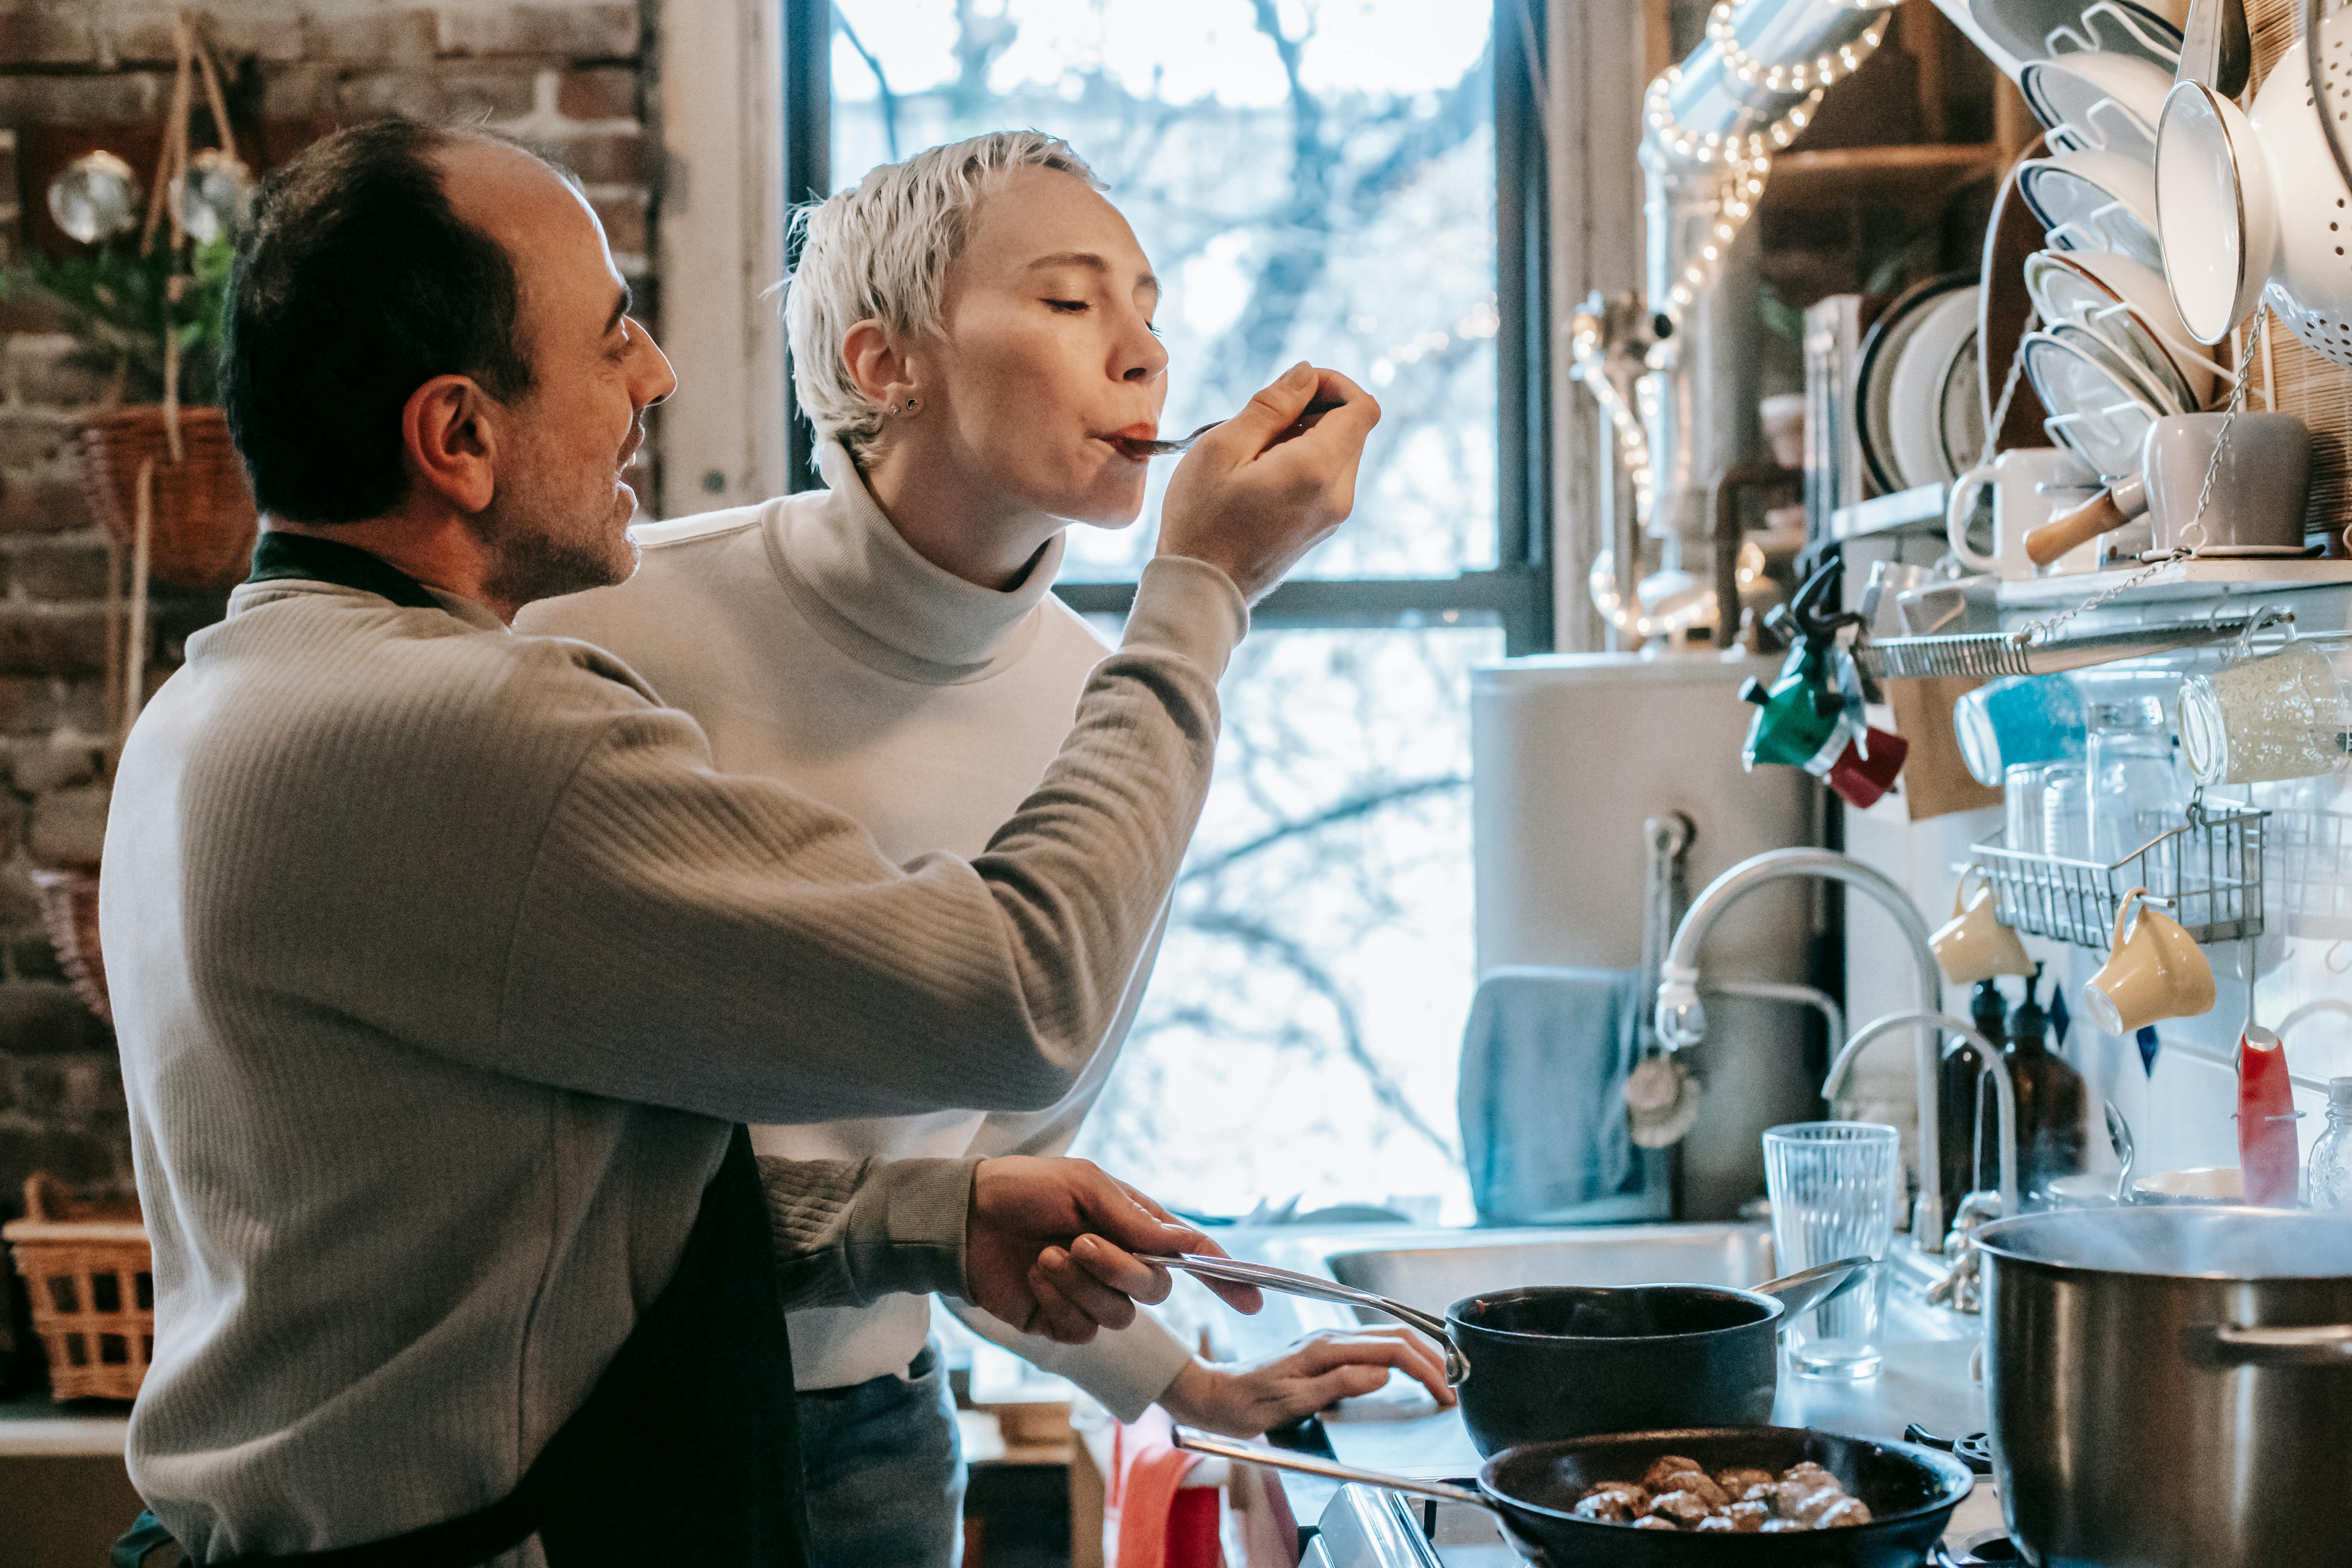 A couple enjoying time cooking | Source: Pexels